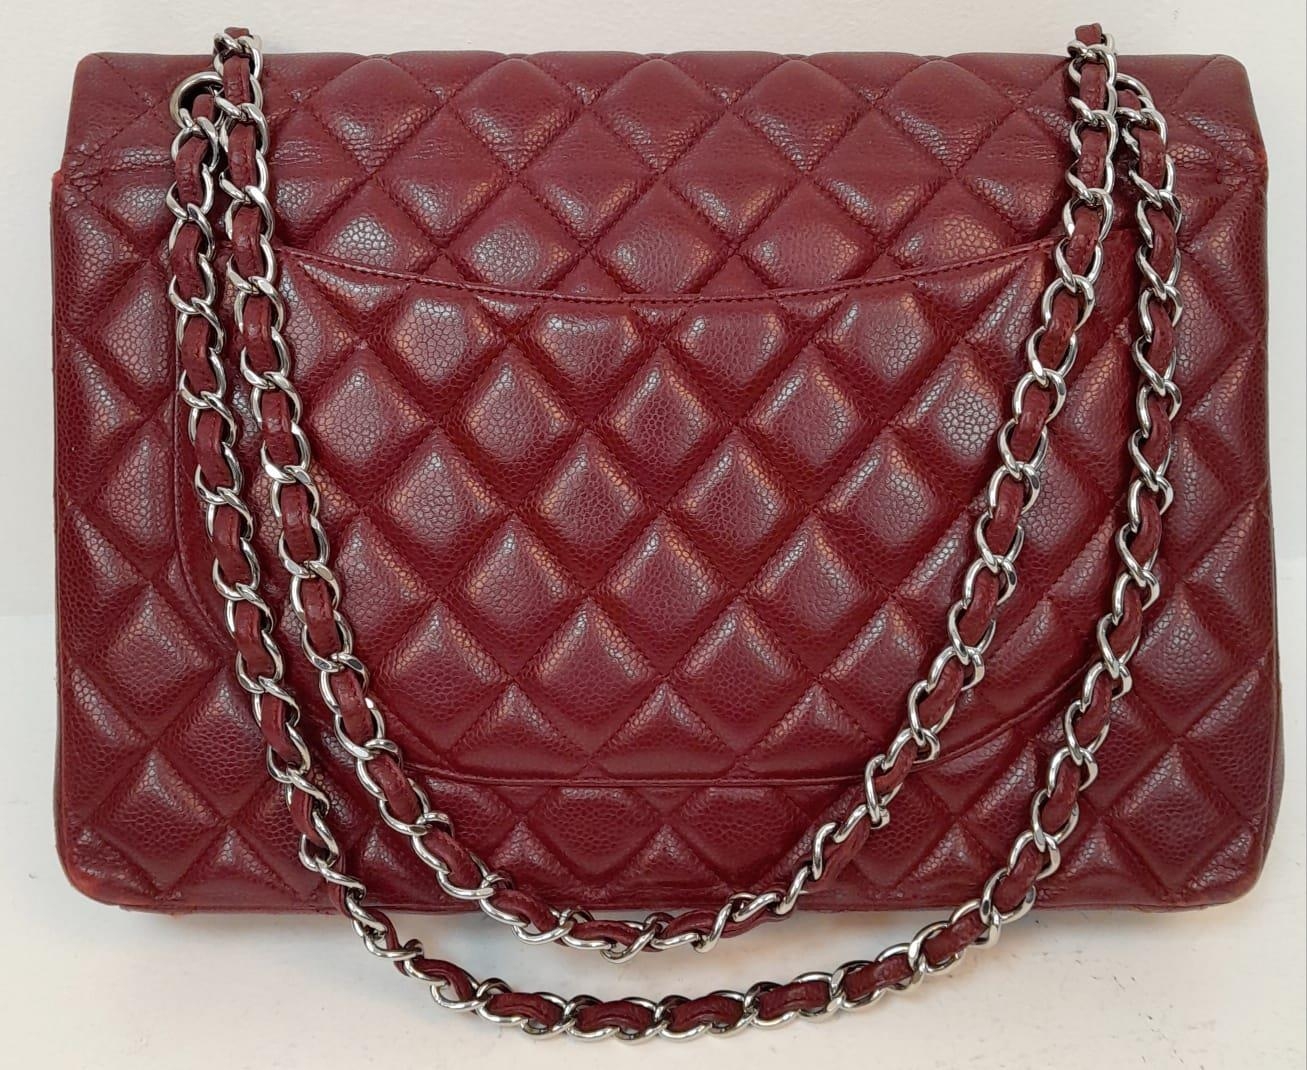 A Chanel Burgundy Jumbo Classic Double Flap Bag. Quilted leather exterior with silver-toned - Image 5 of 16